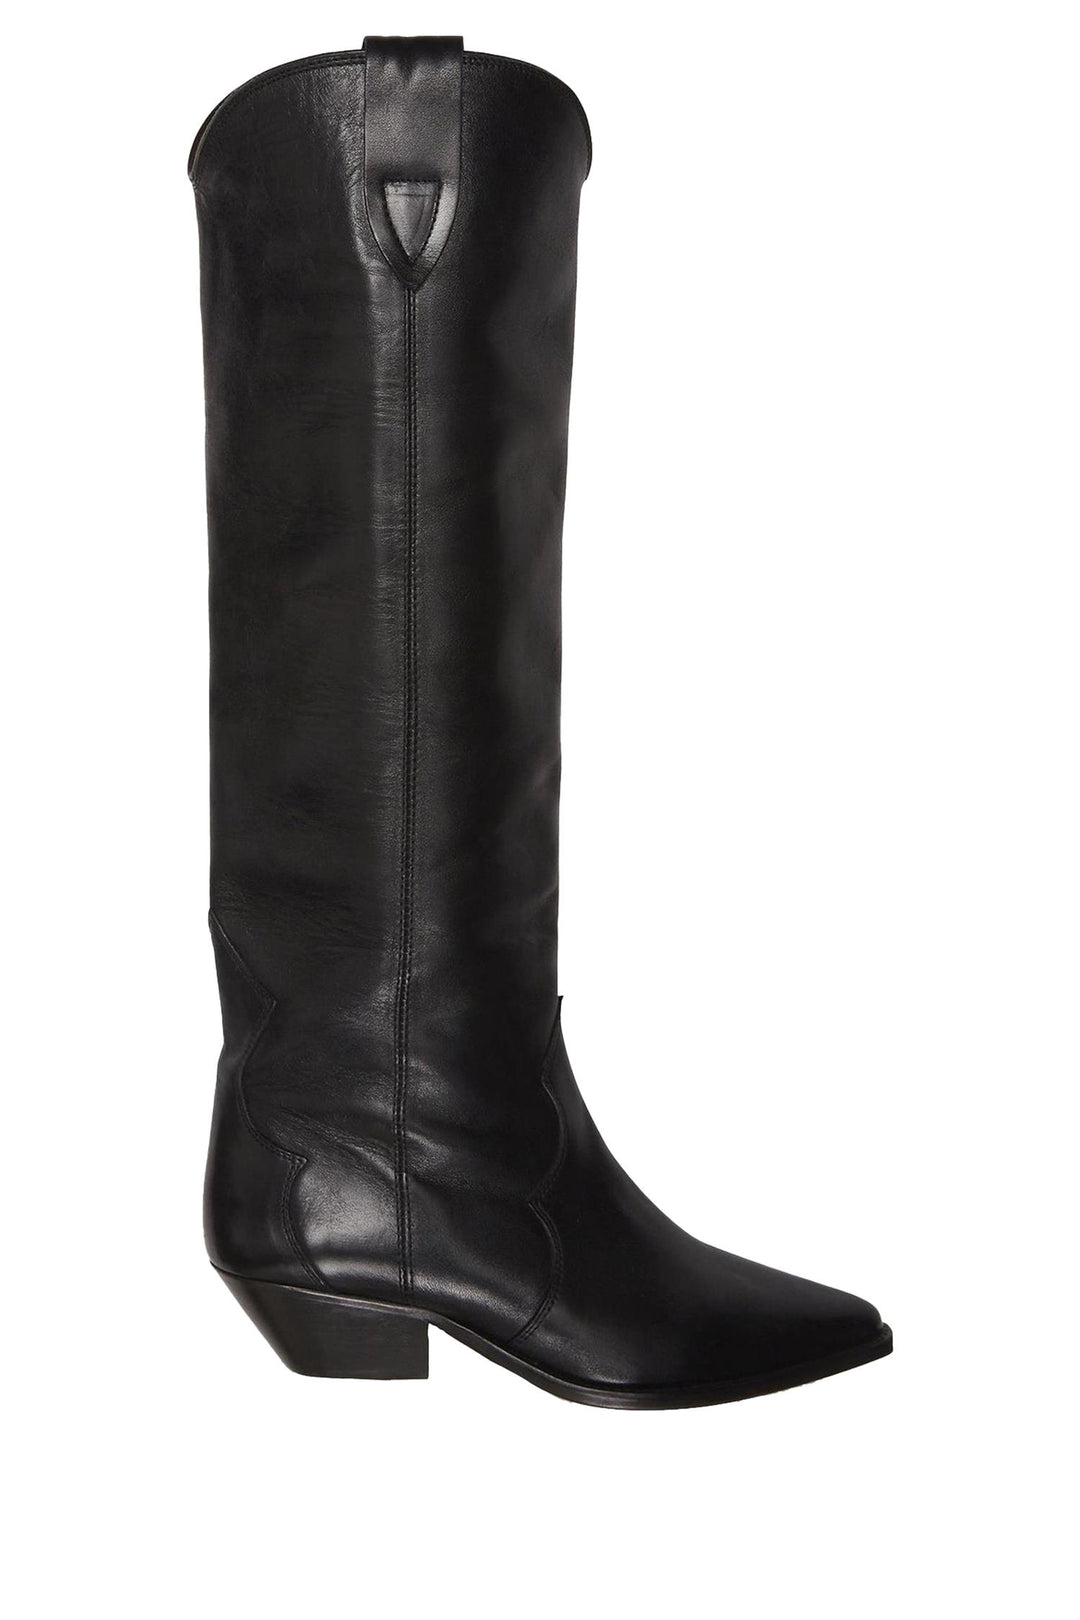 Denvee High Boots Leather Iconic Black